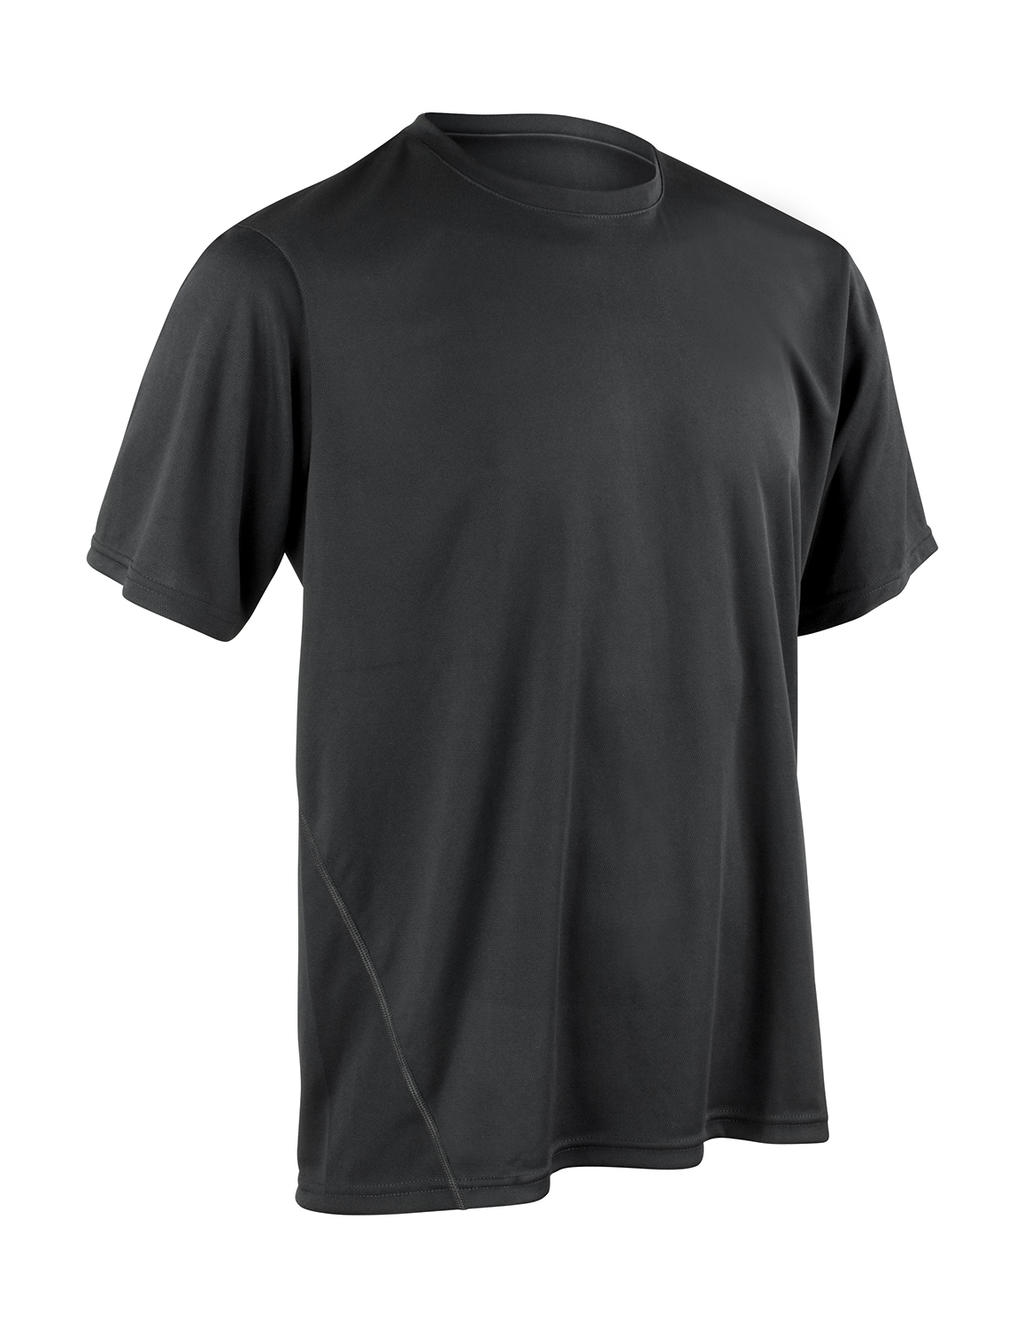  Performance T-Shirt in Farbe Black